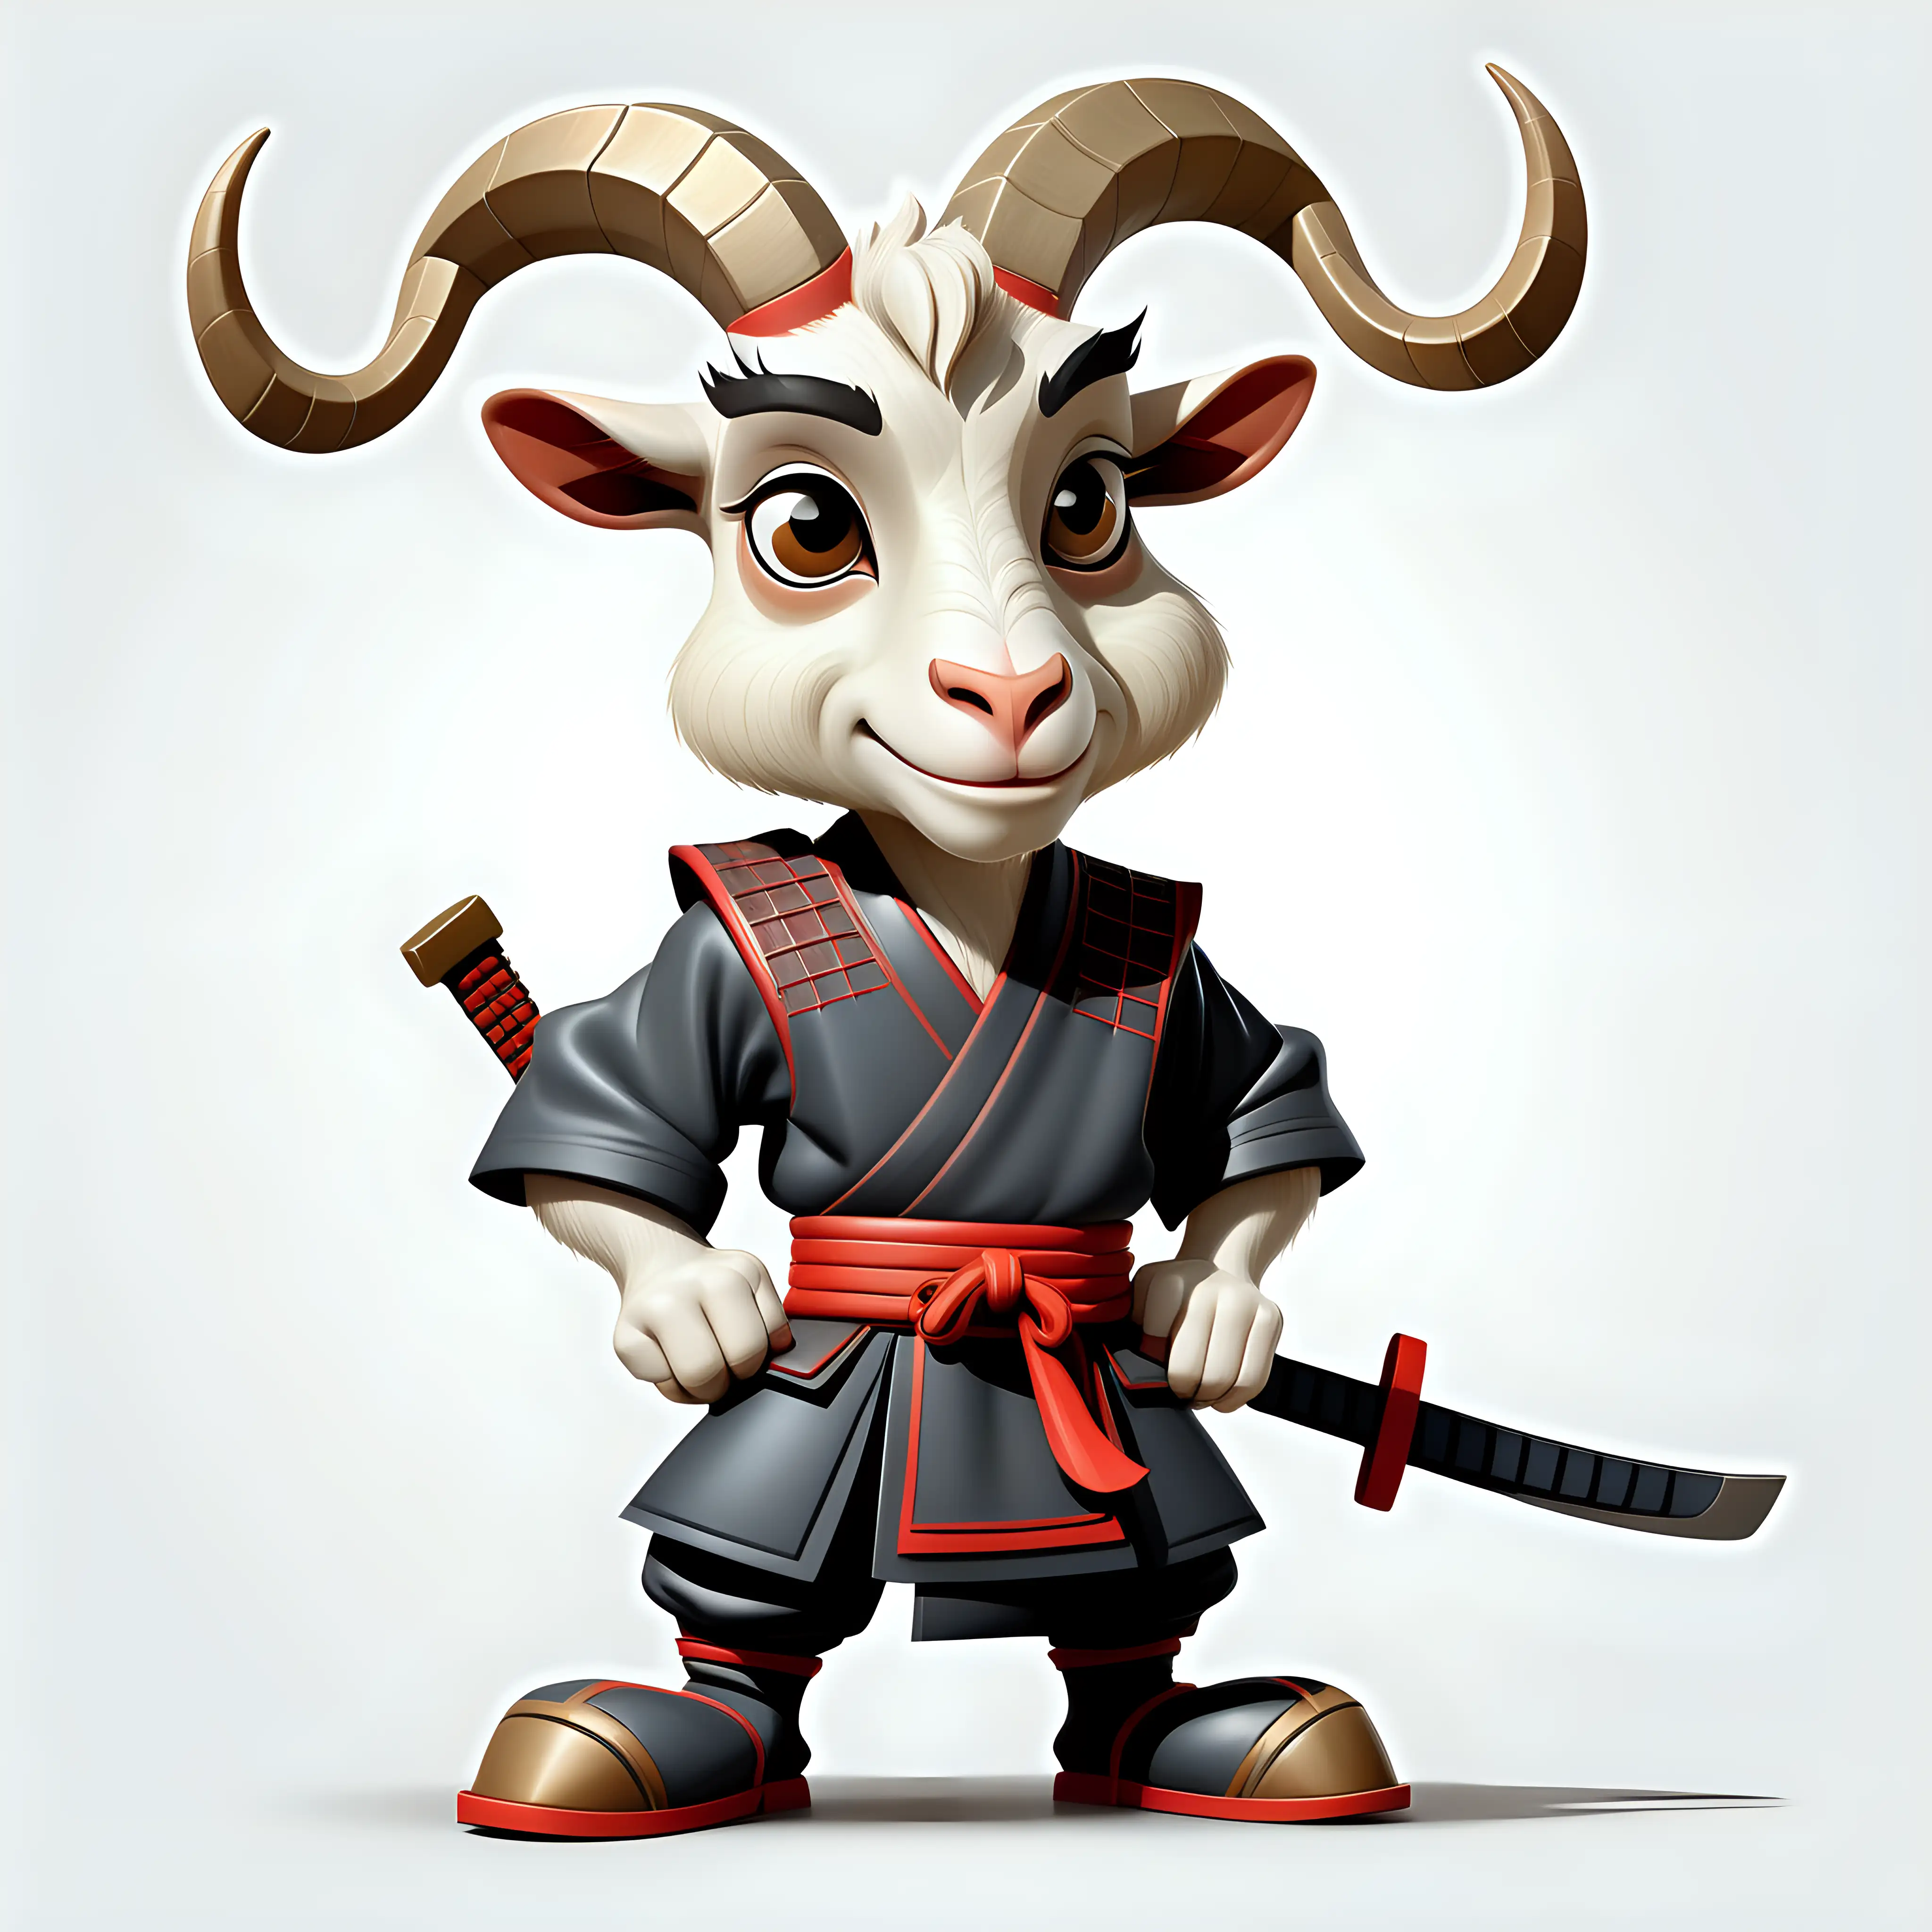 Cartoon Samurai Goat Clipart with Boots on White Background